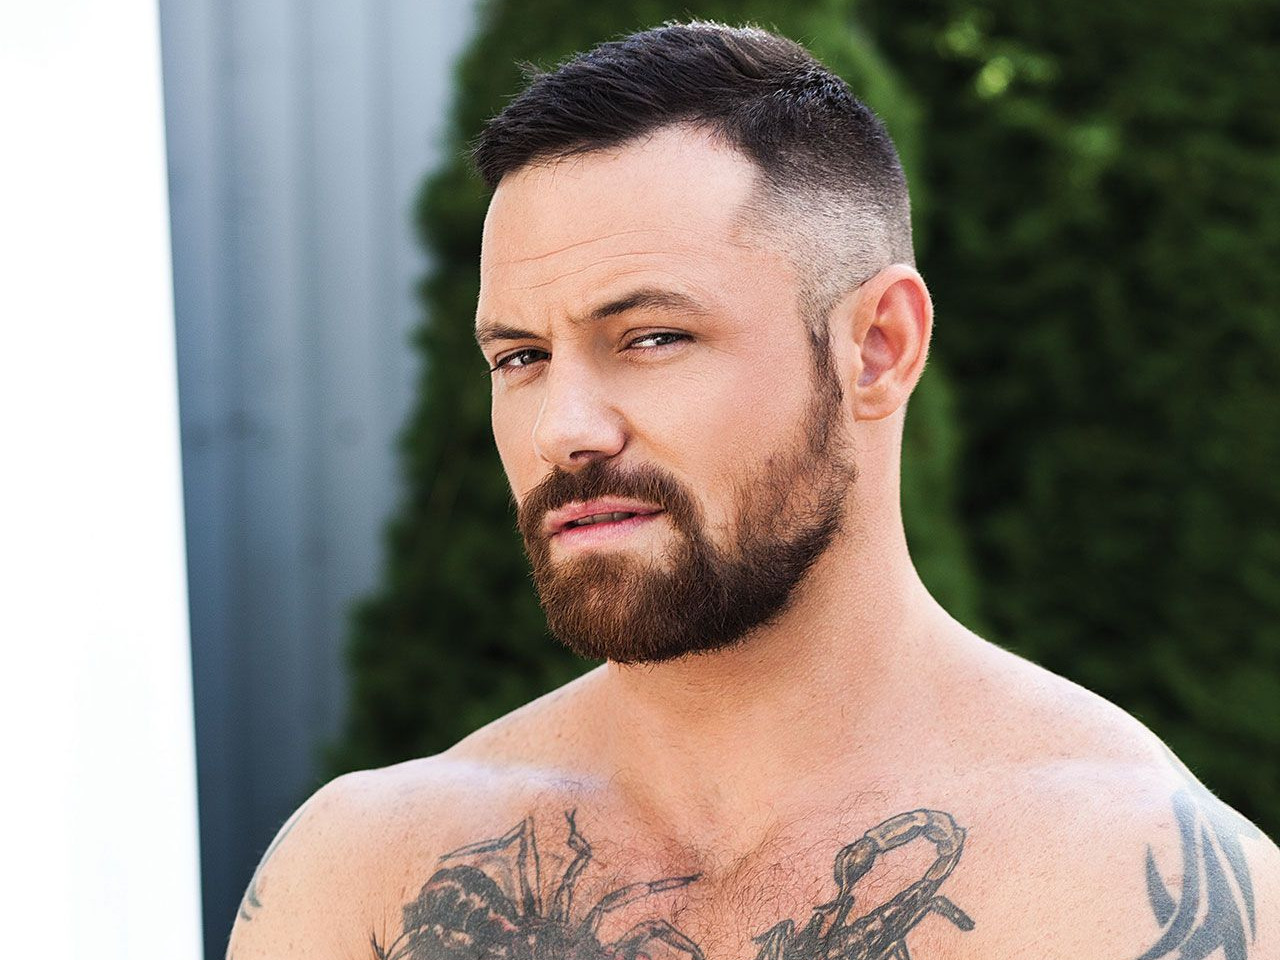 Dlu Pikchr - Sergeant Miles: Gay porn star hits out at coronavirus restrictions